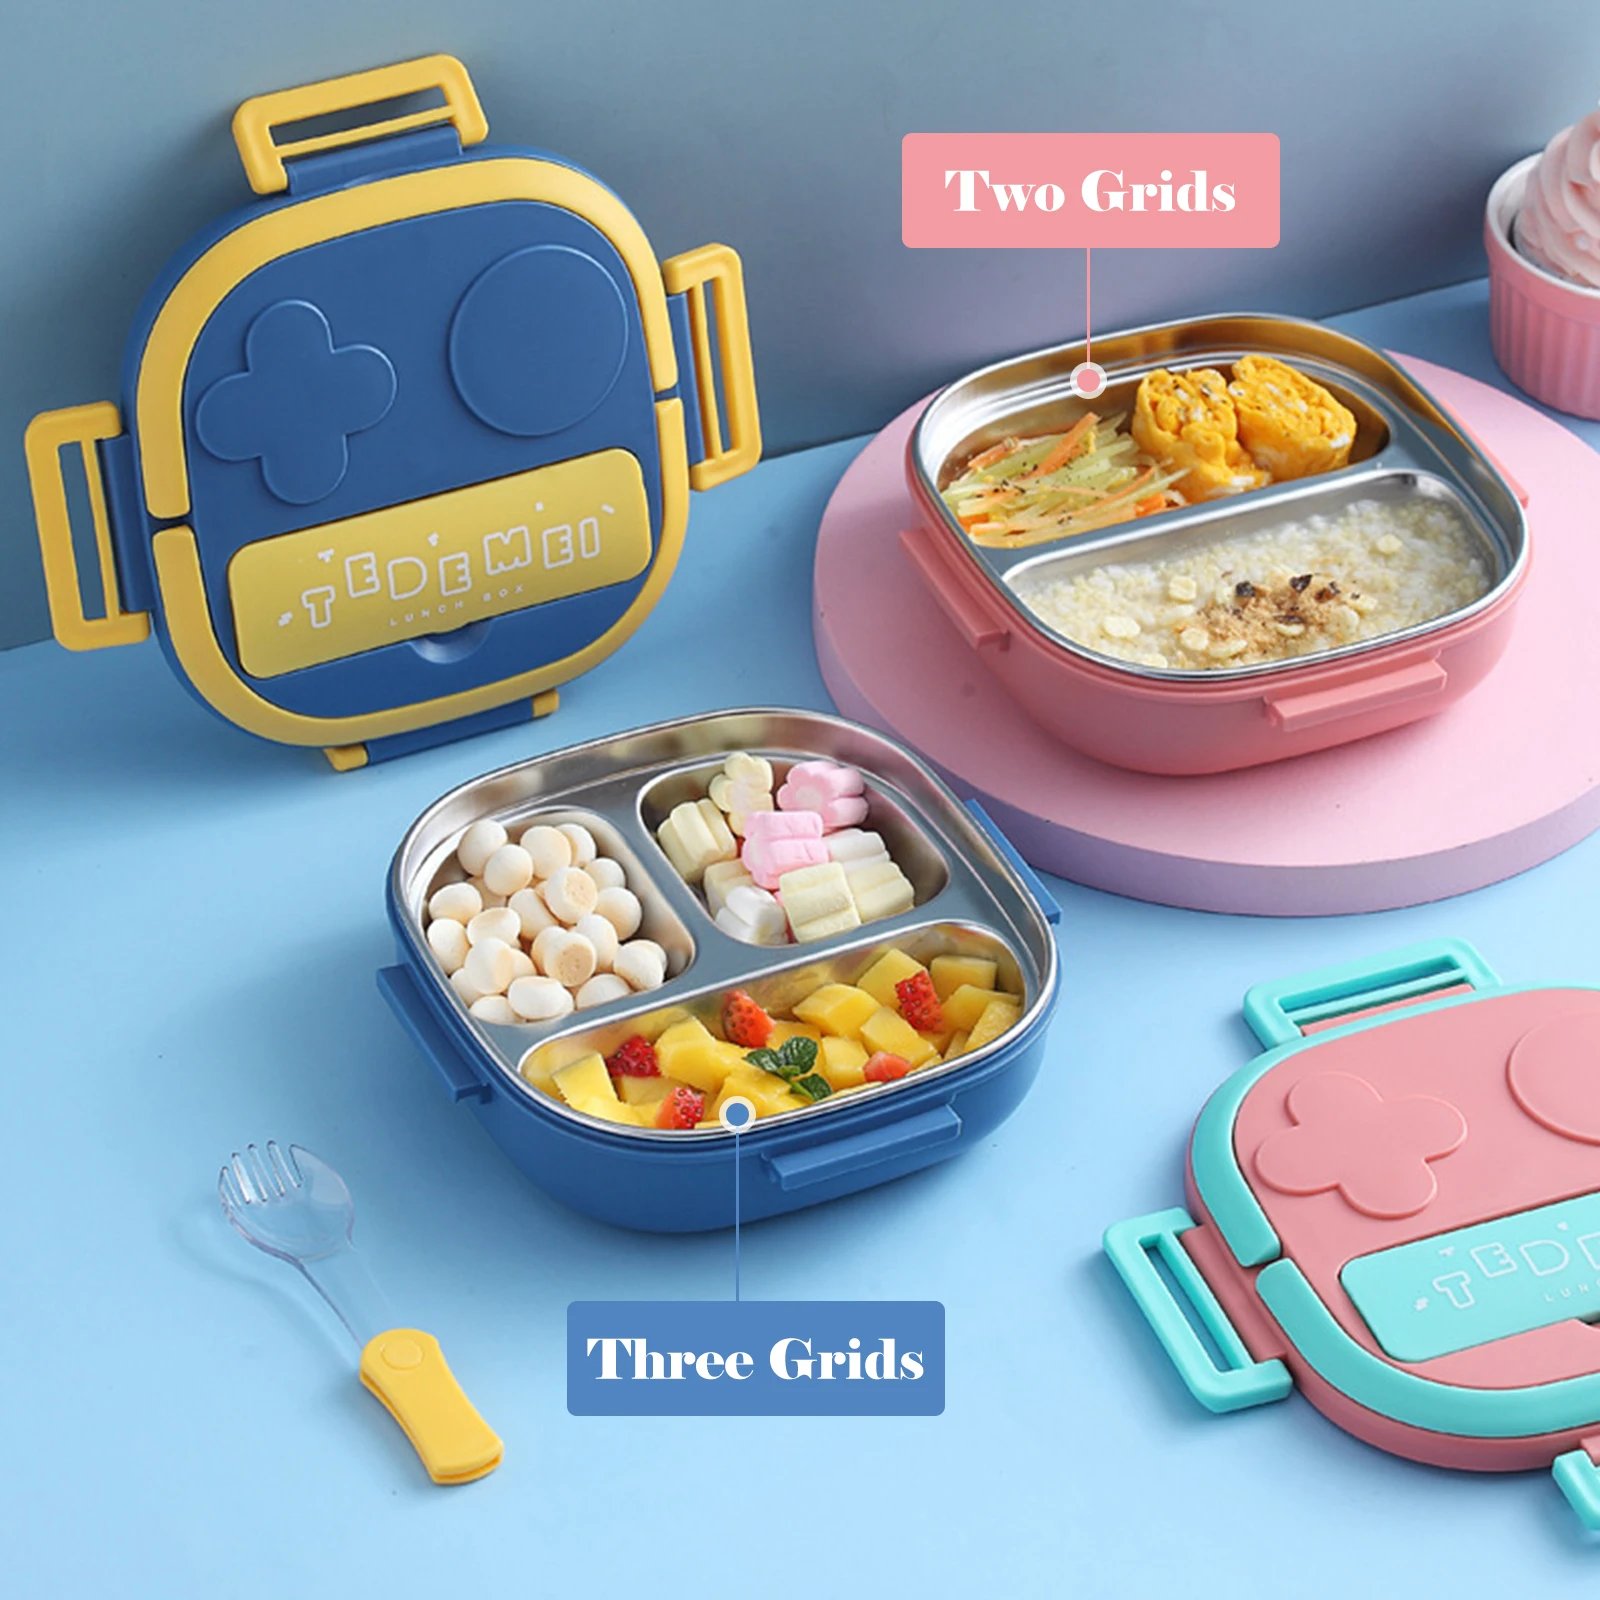 https://ae01.alicdn.com/kf/Sa27debc1d22a42e08ae644ec6f3c3c48y/Lunch-Box-With-Fork-3-Compartment-Japanese-Lunch-Box-Reusable-Lunch-Dinner-Containers-Leakproof-Stainless-Steel.jpg